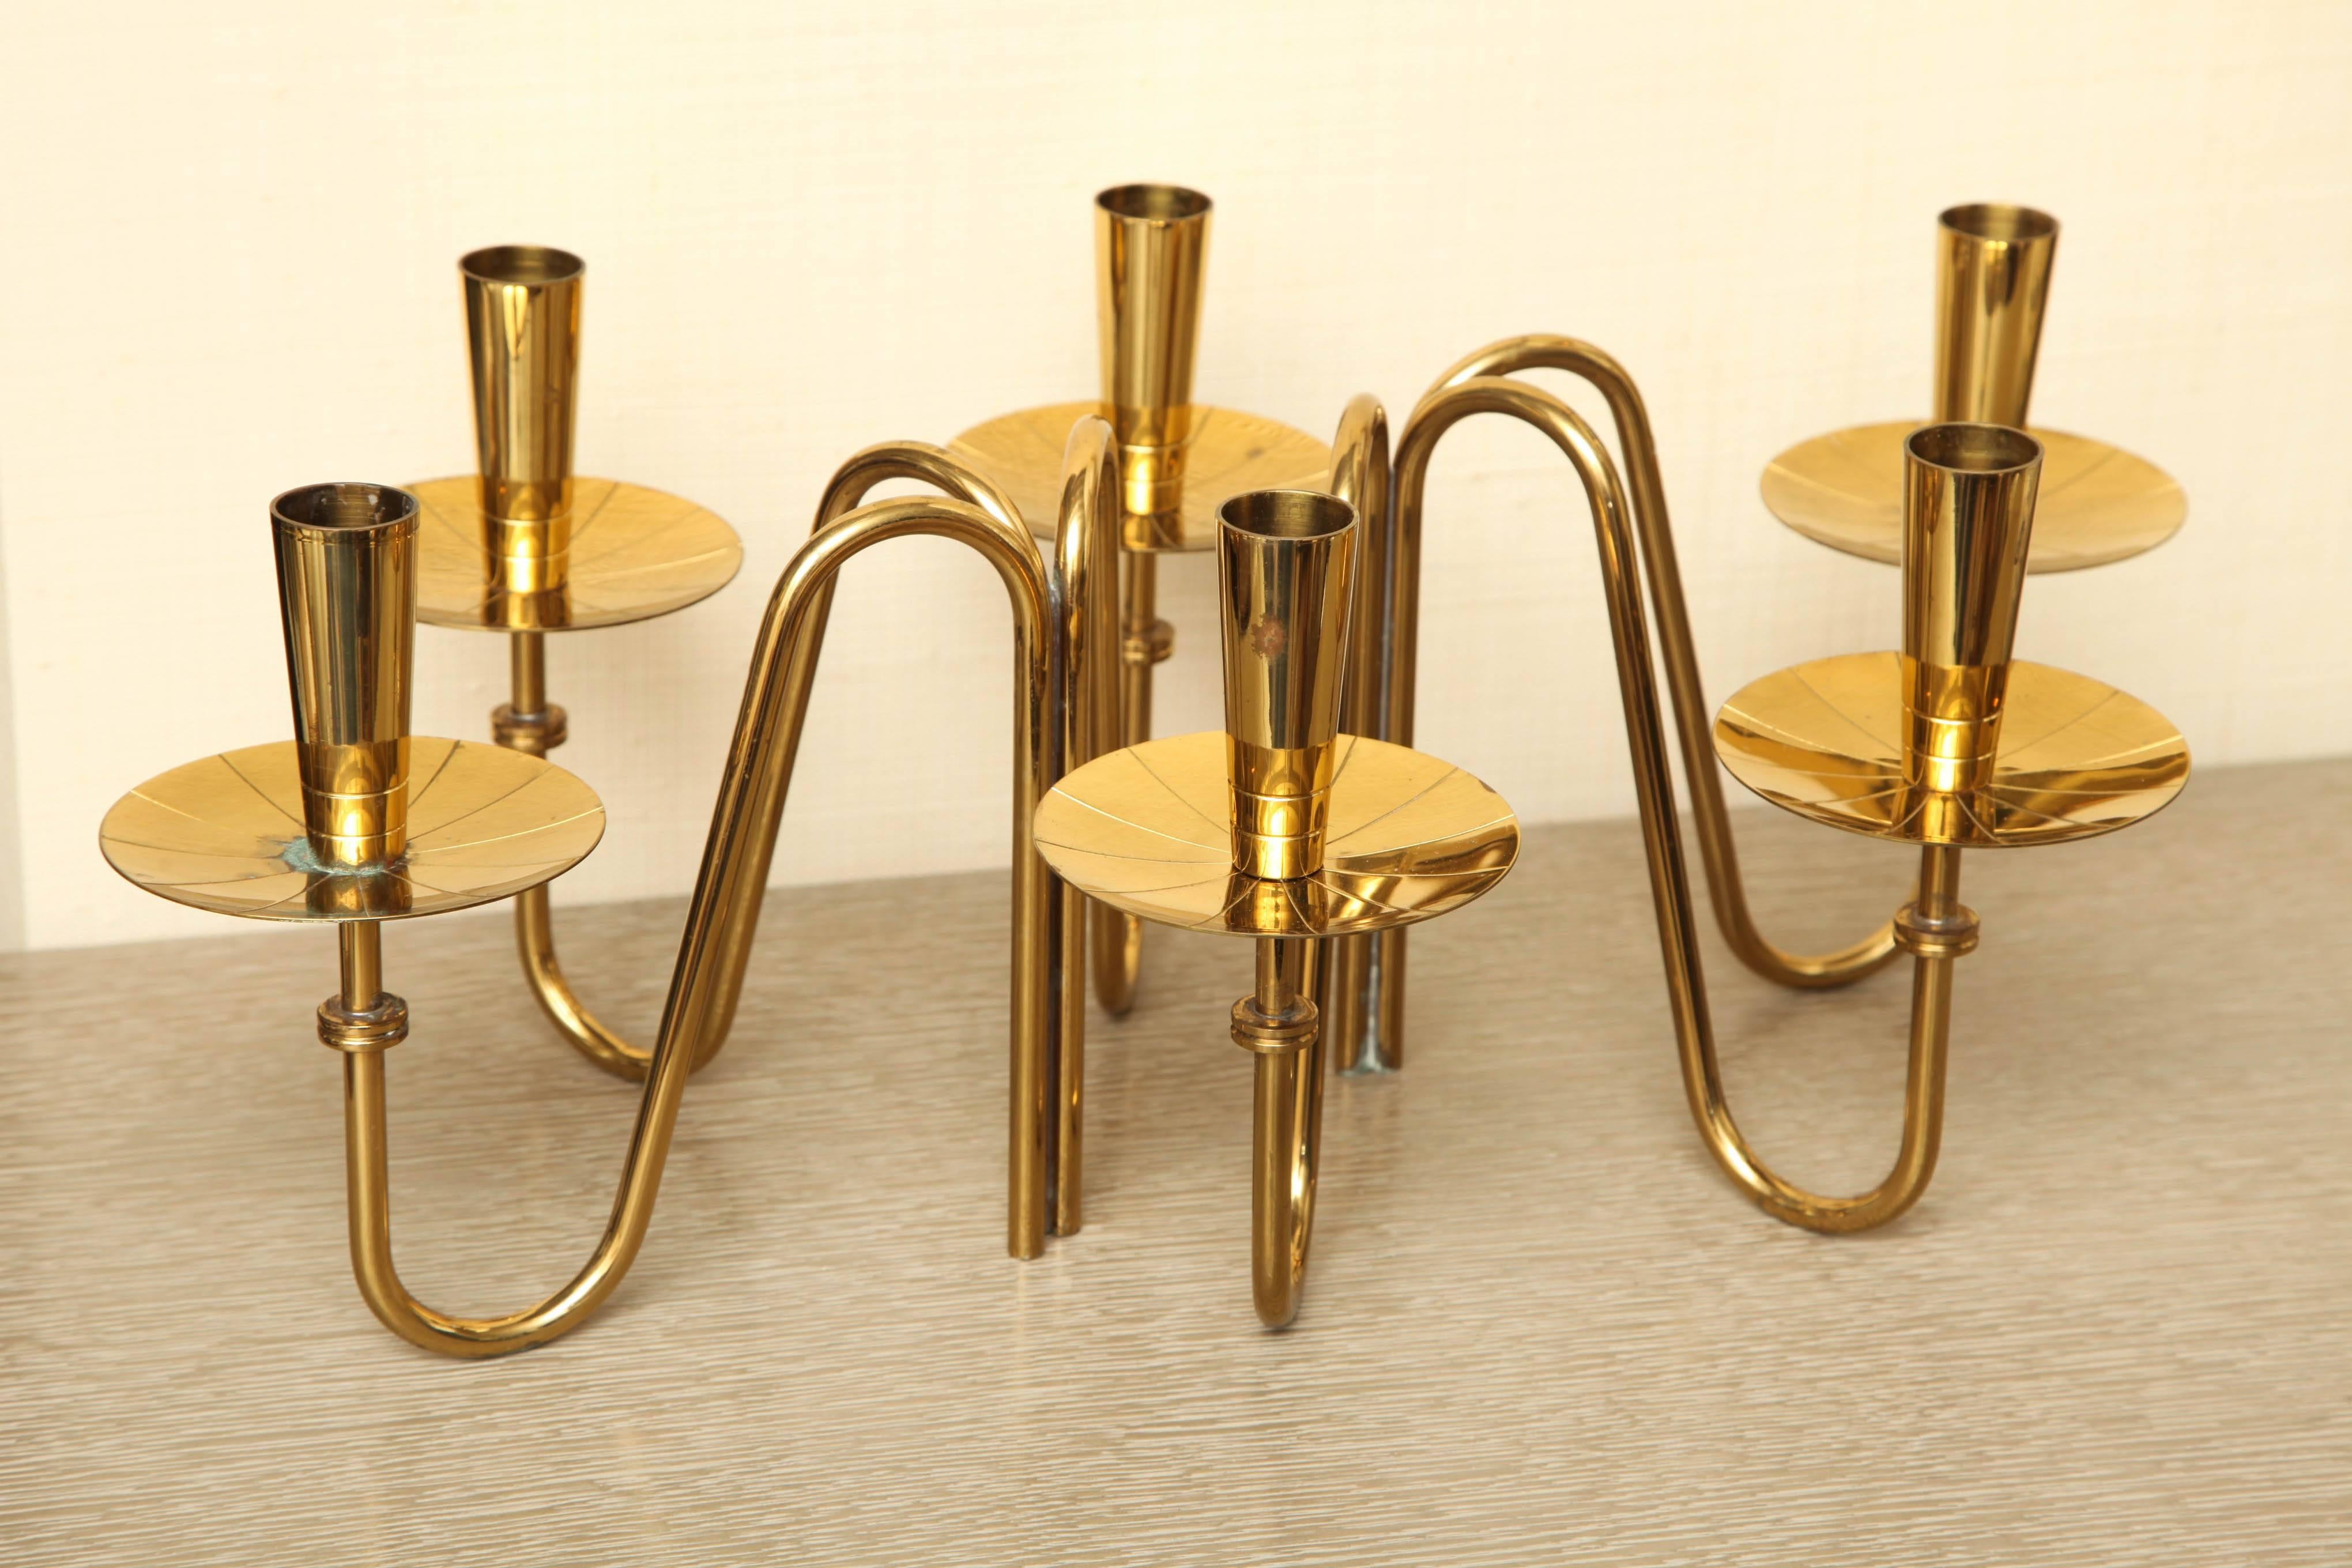 Pair of Brass Candle Holders by Tommi Parzinger, circa 1960 For Sale 3